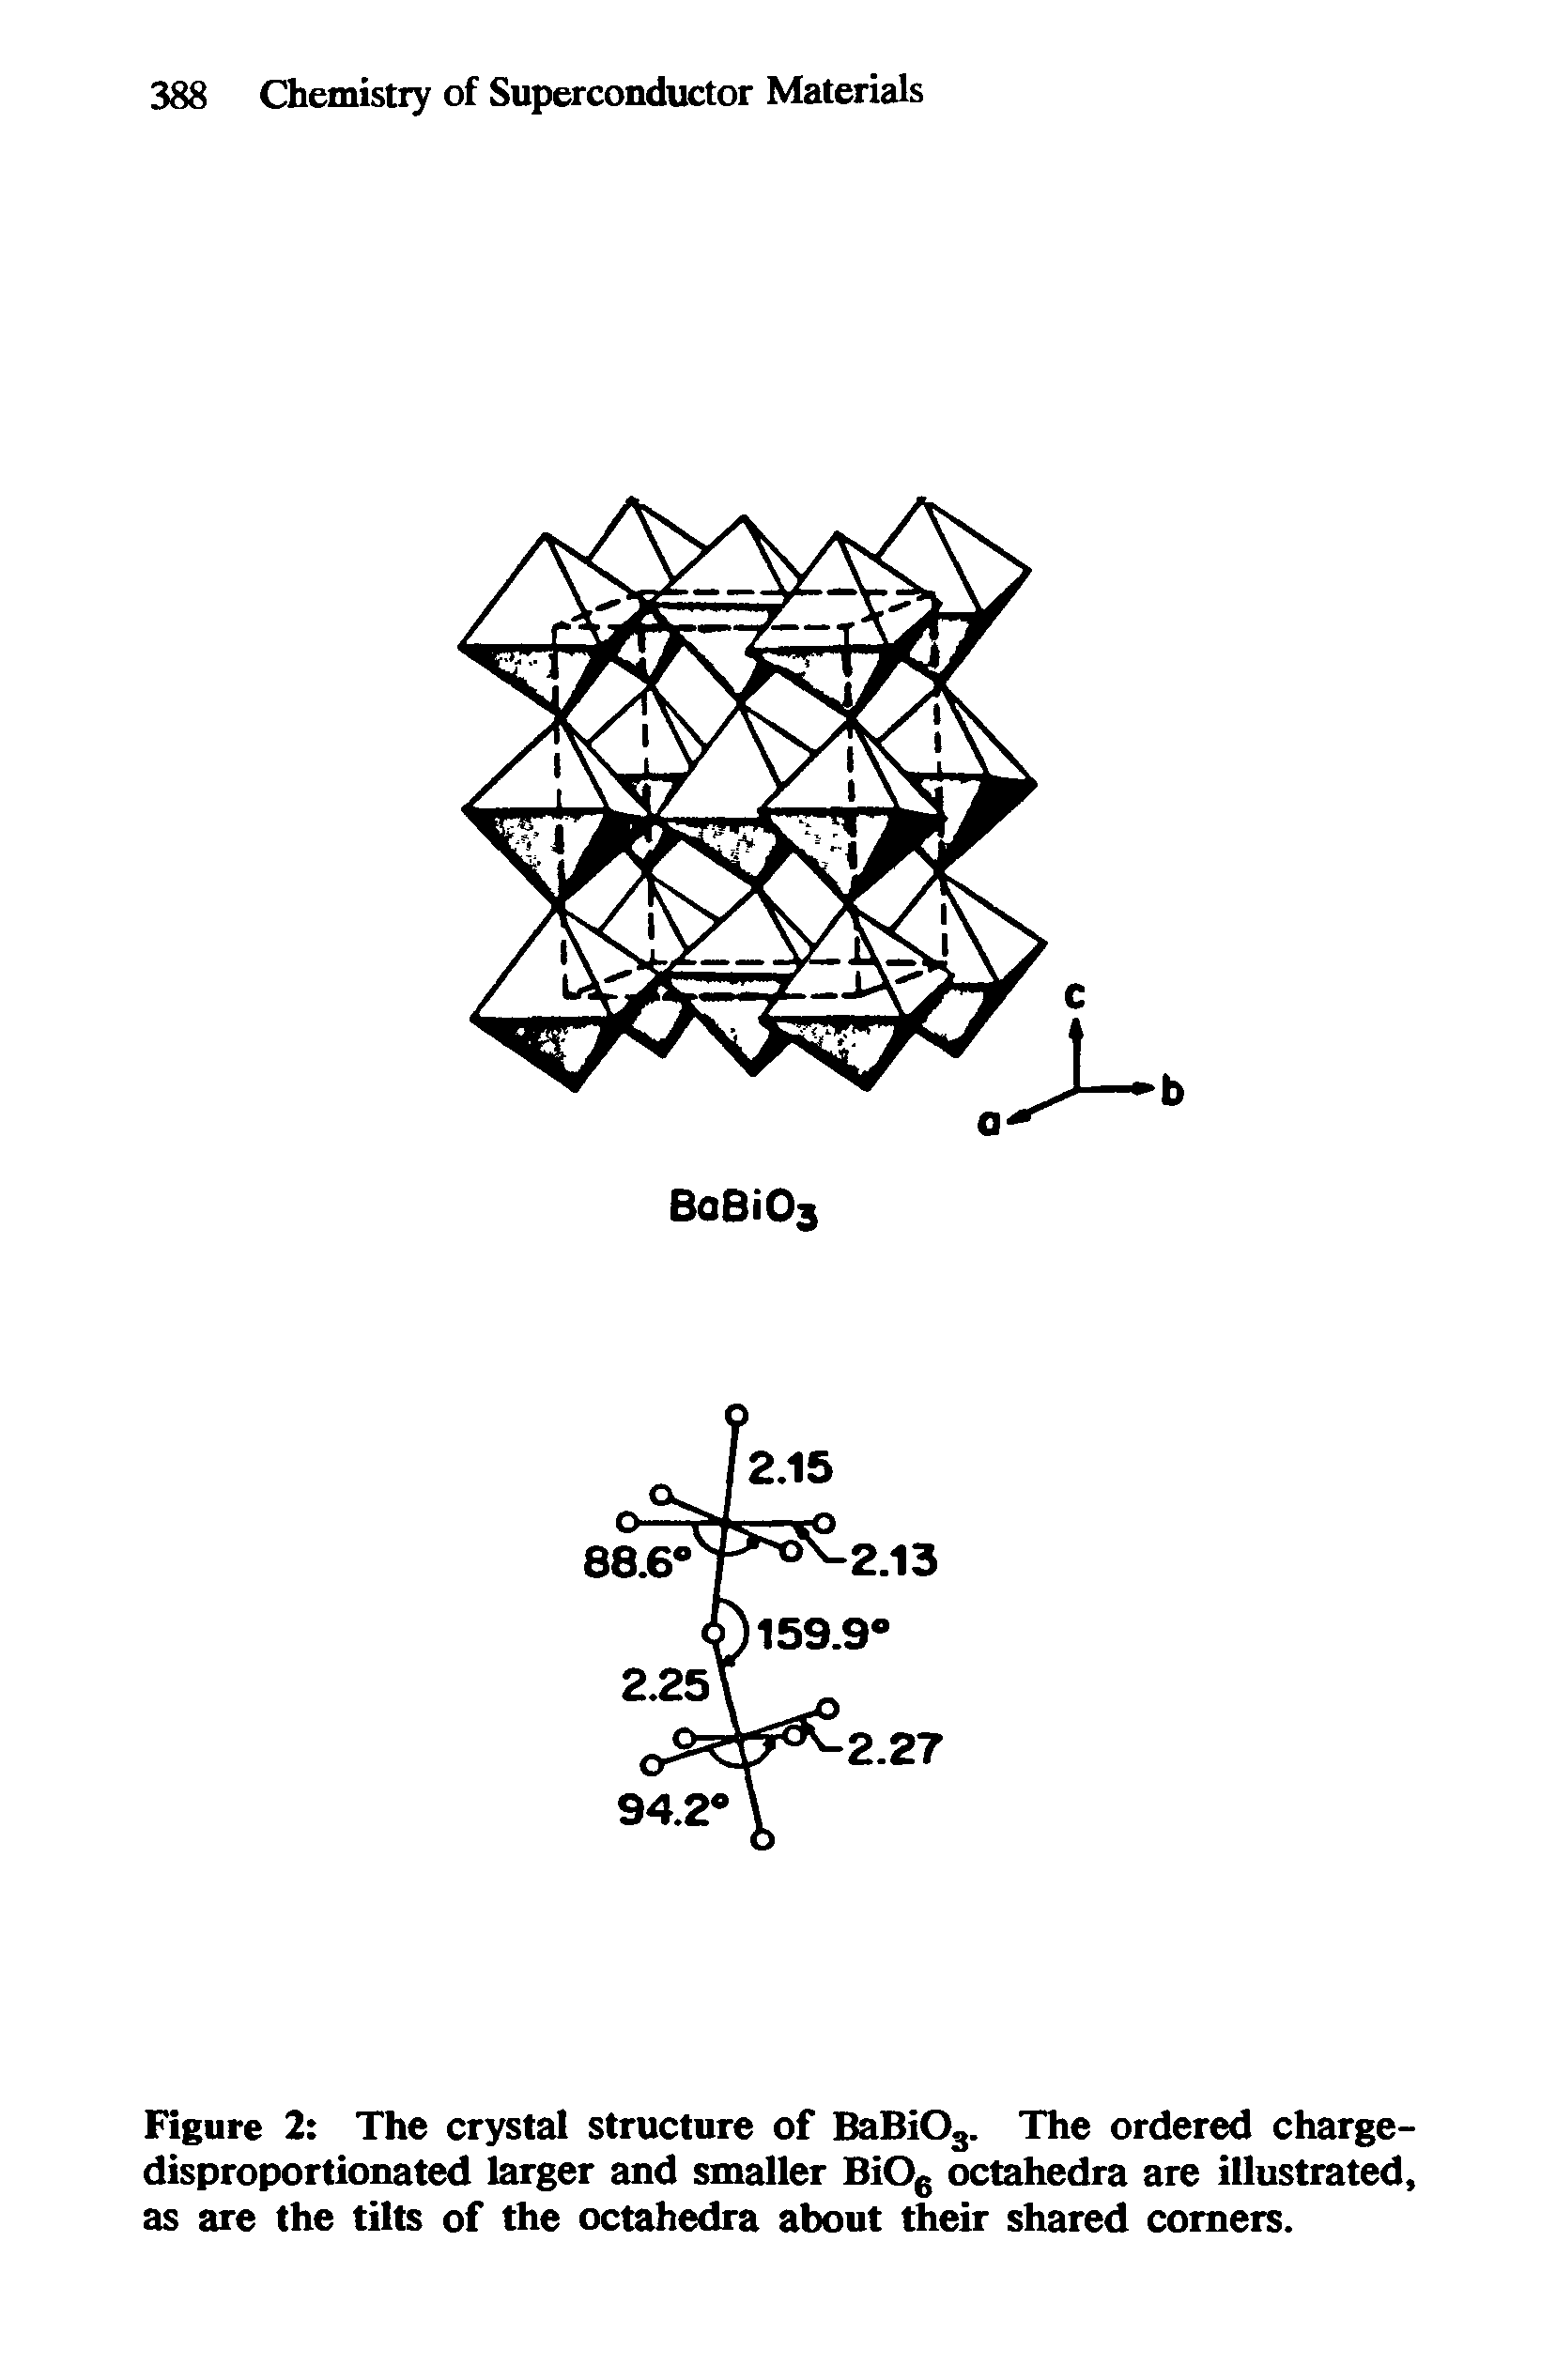 Figure 2 The crystal structure of BaBiOs. The ordered charge-disproportionated larger and smaller BiOe octahedra are illustrated, as are the tilts of the octahedra about their shared comers.